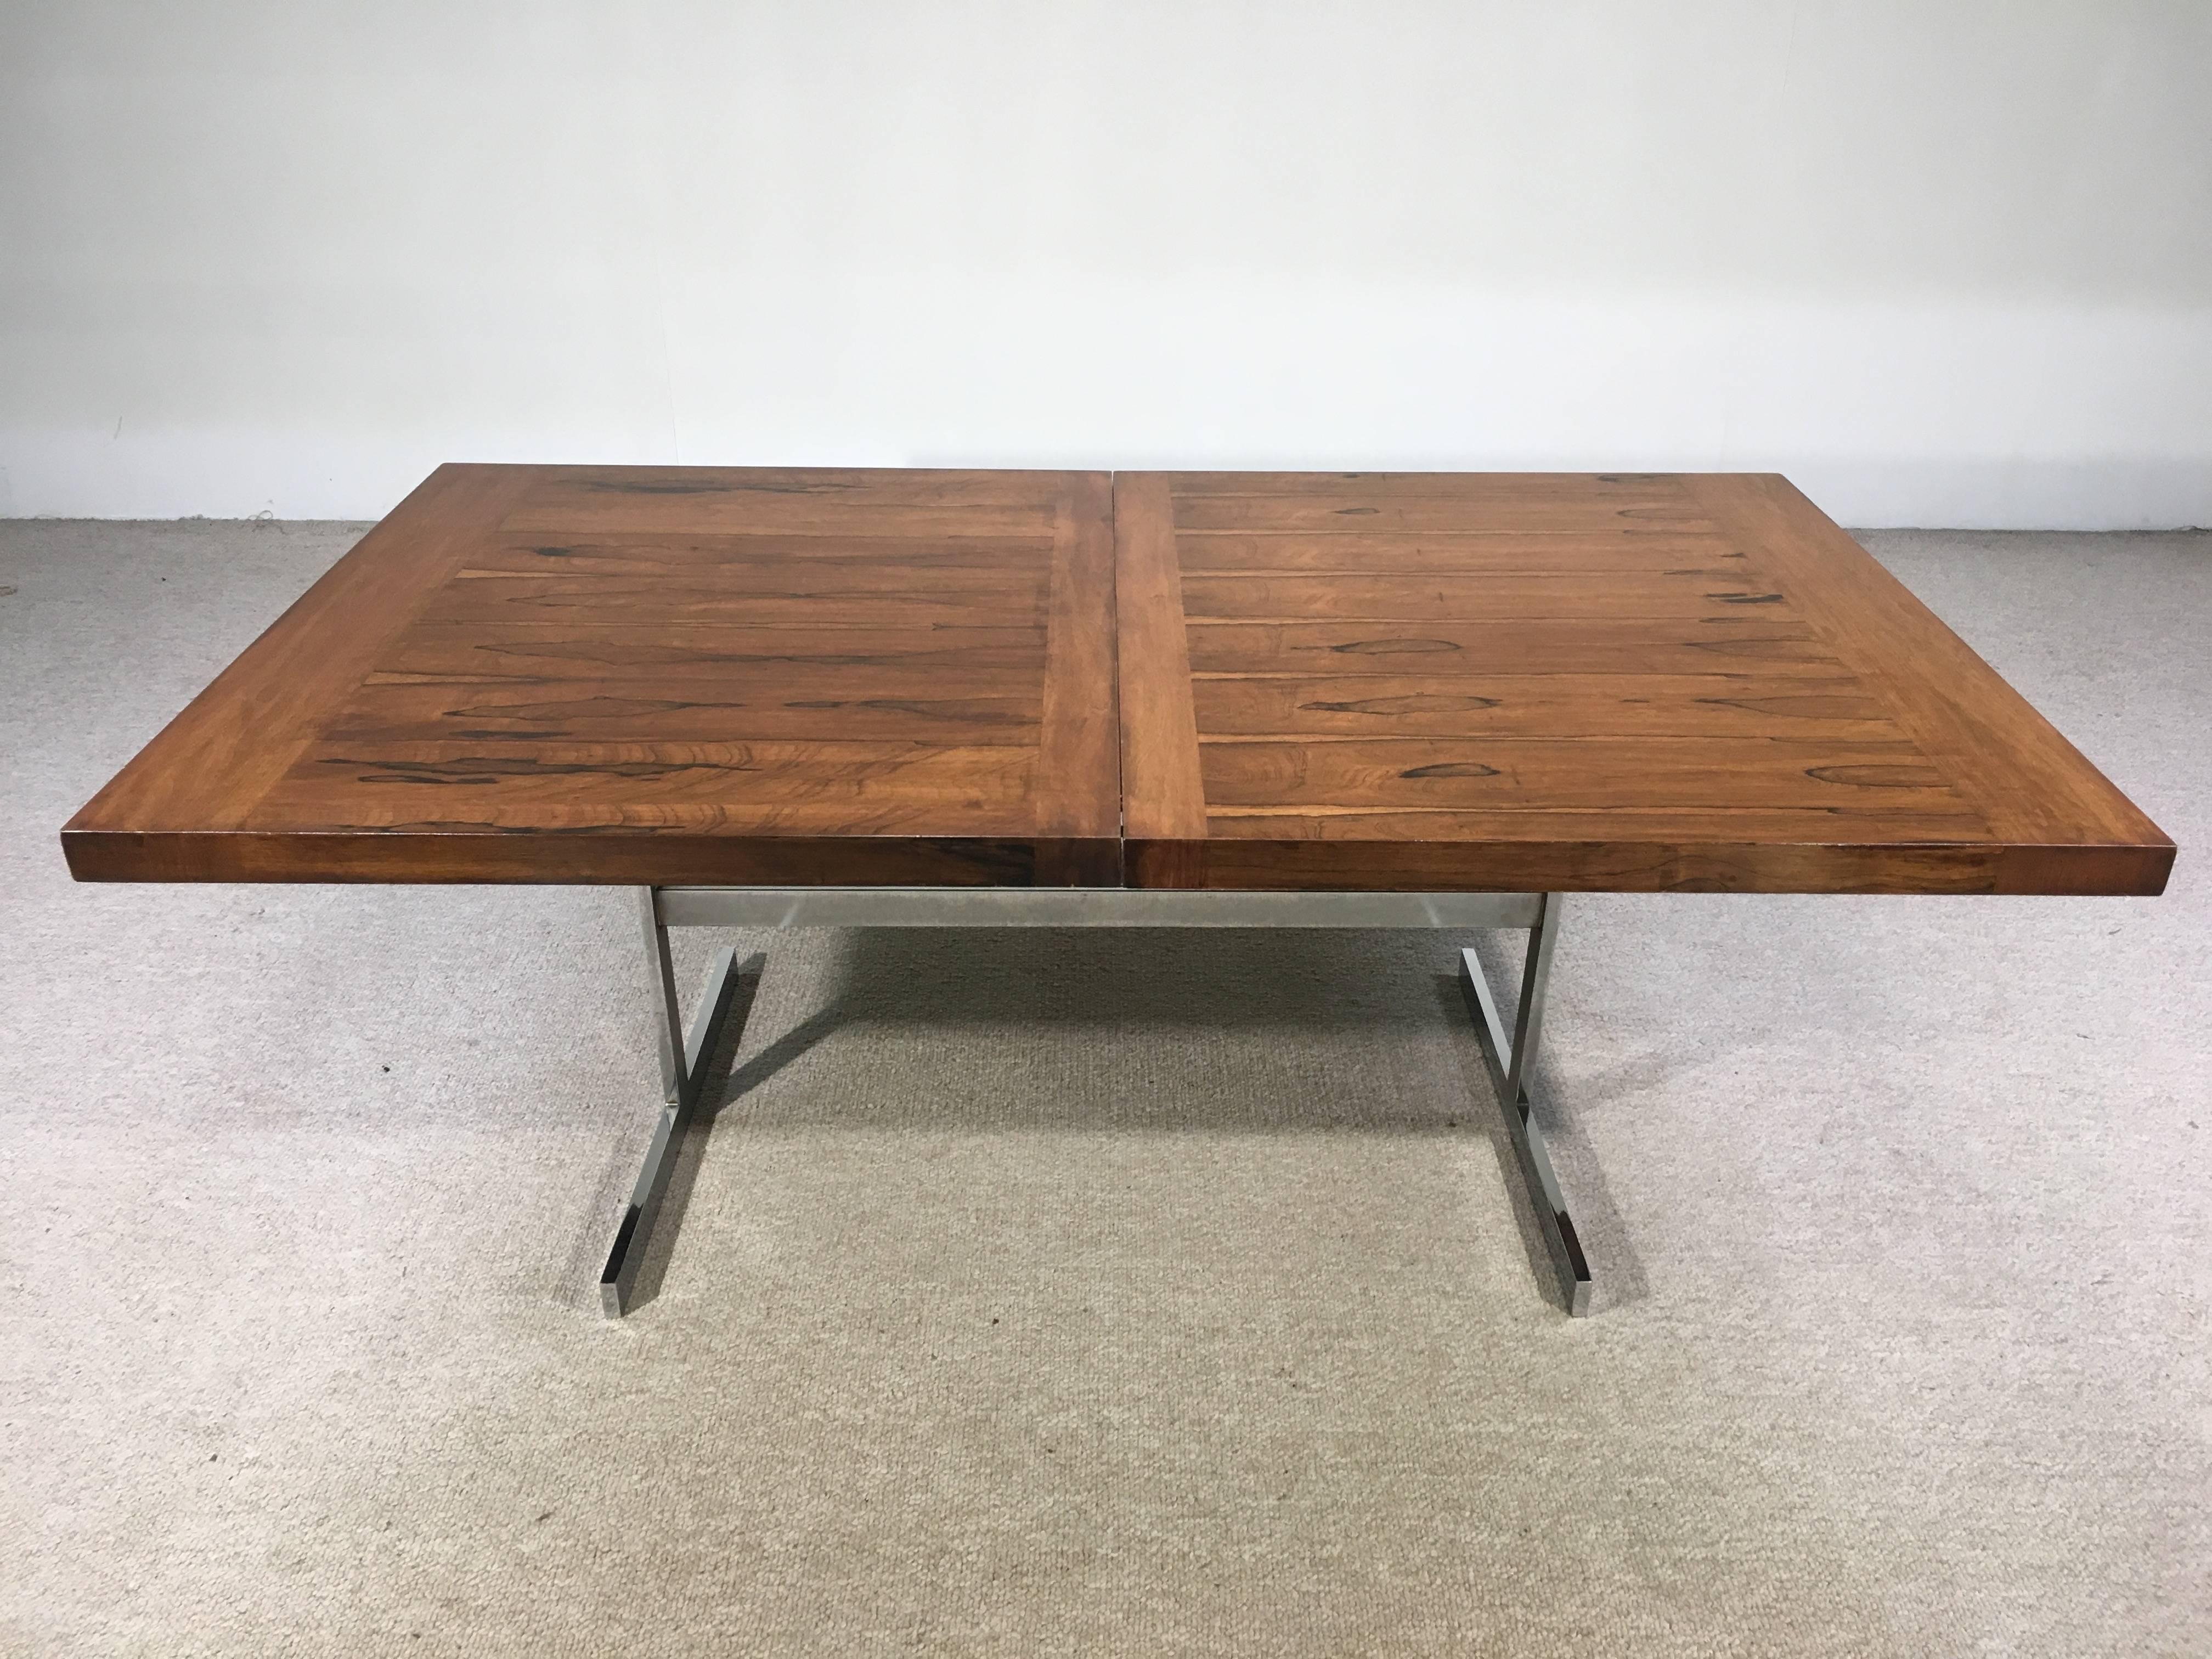 A beautiful and masterfully crafted 1960s expandable dining table after Milo Baughman having mixed Brazilian rosewood and walnut top with chromed steel base. Acquired from the original owner who has cherished this table and taken very good care of